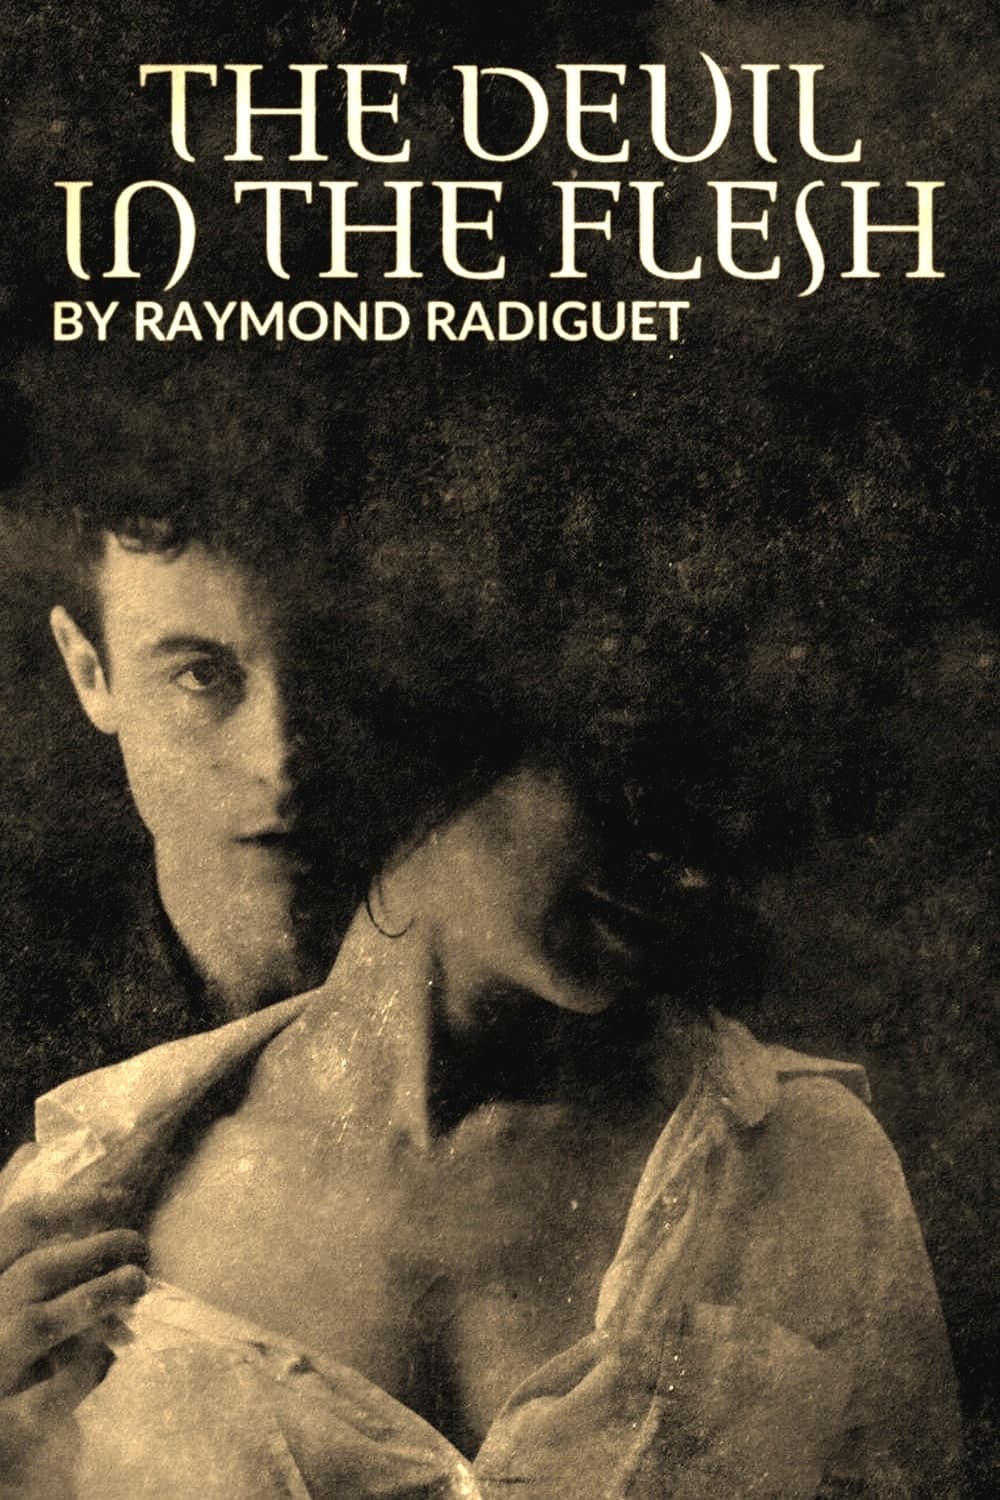 The Devil in the Flesh, by Raymond Radiguet: The Romance that Scandalised a Nation